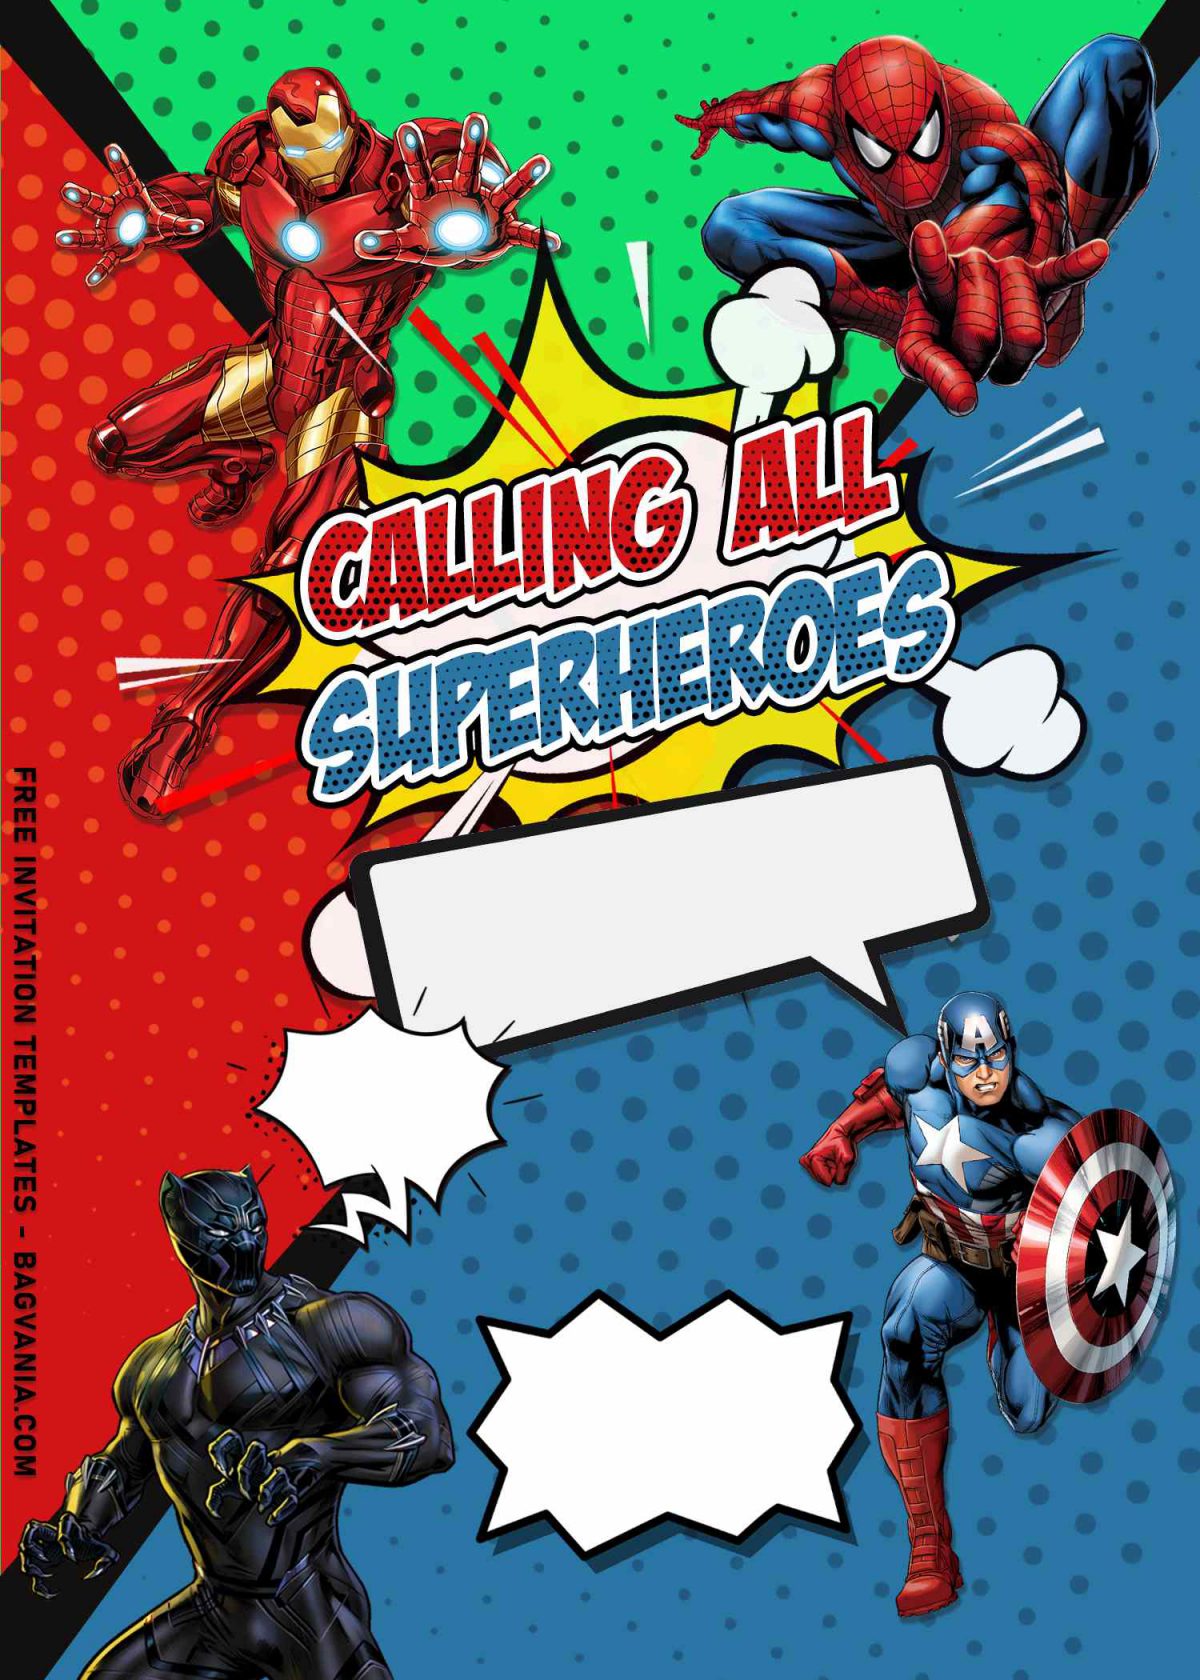 8+ Awesome Avengers Birthday Invitation Templates For Your Kid's Birthday Party and has Spiderman